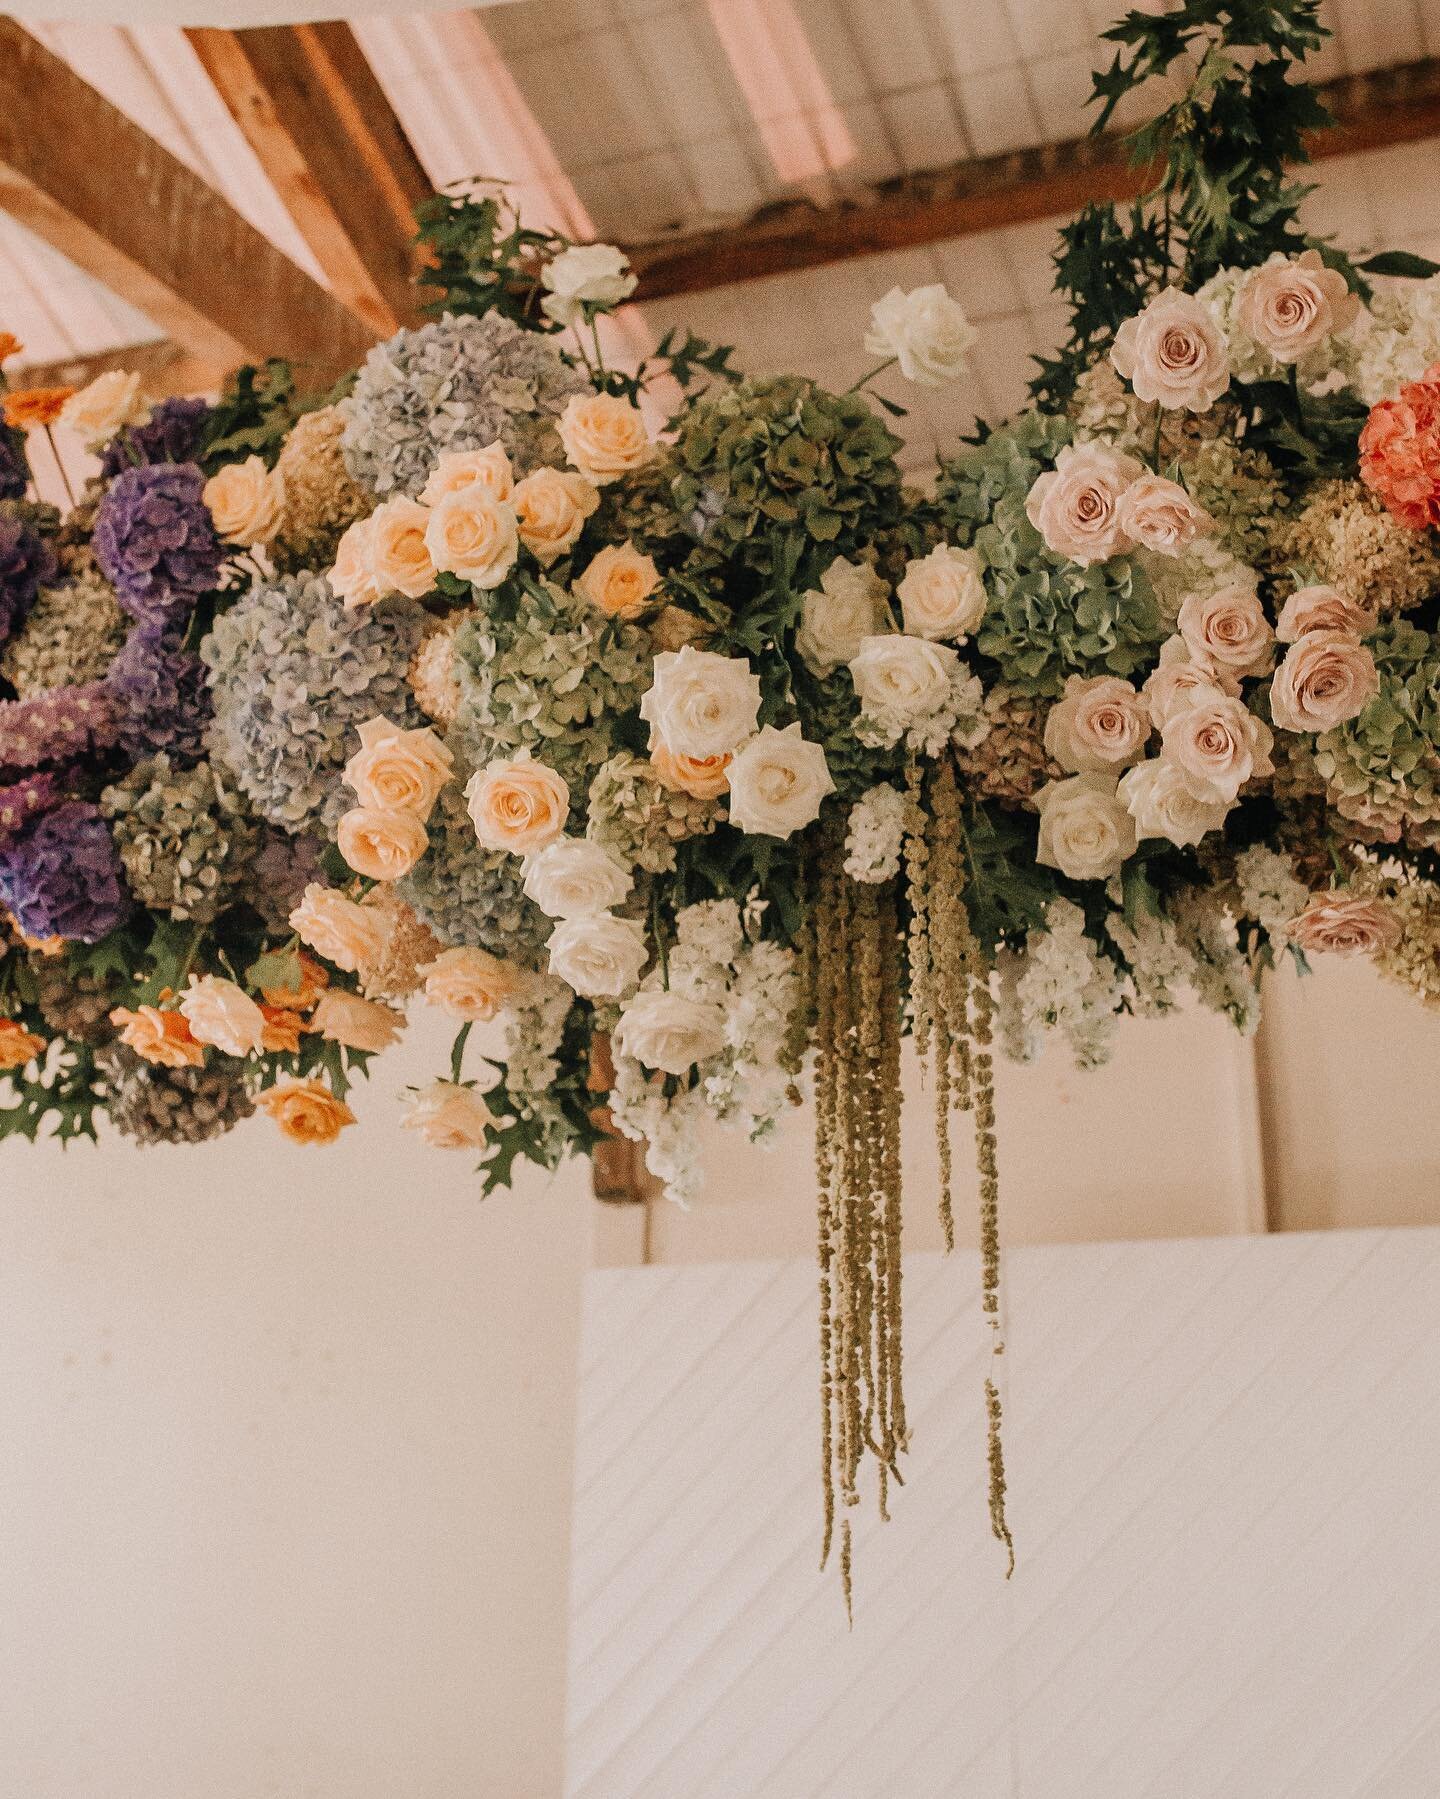 The biggest piece I&rsquo;ve made! Thanks to Sophie and Fin for letting me create it and for the pretty photos @sophiemilsonphotography 💚

#nelsonflorist #flowerinstallation #nelsonnz #weddingfloristnz #weddingfloristnelson